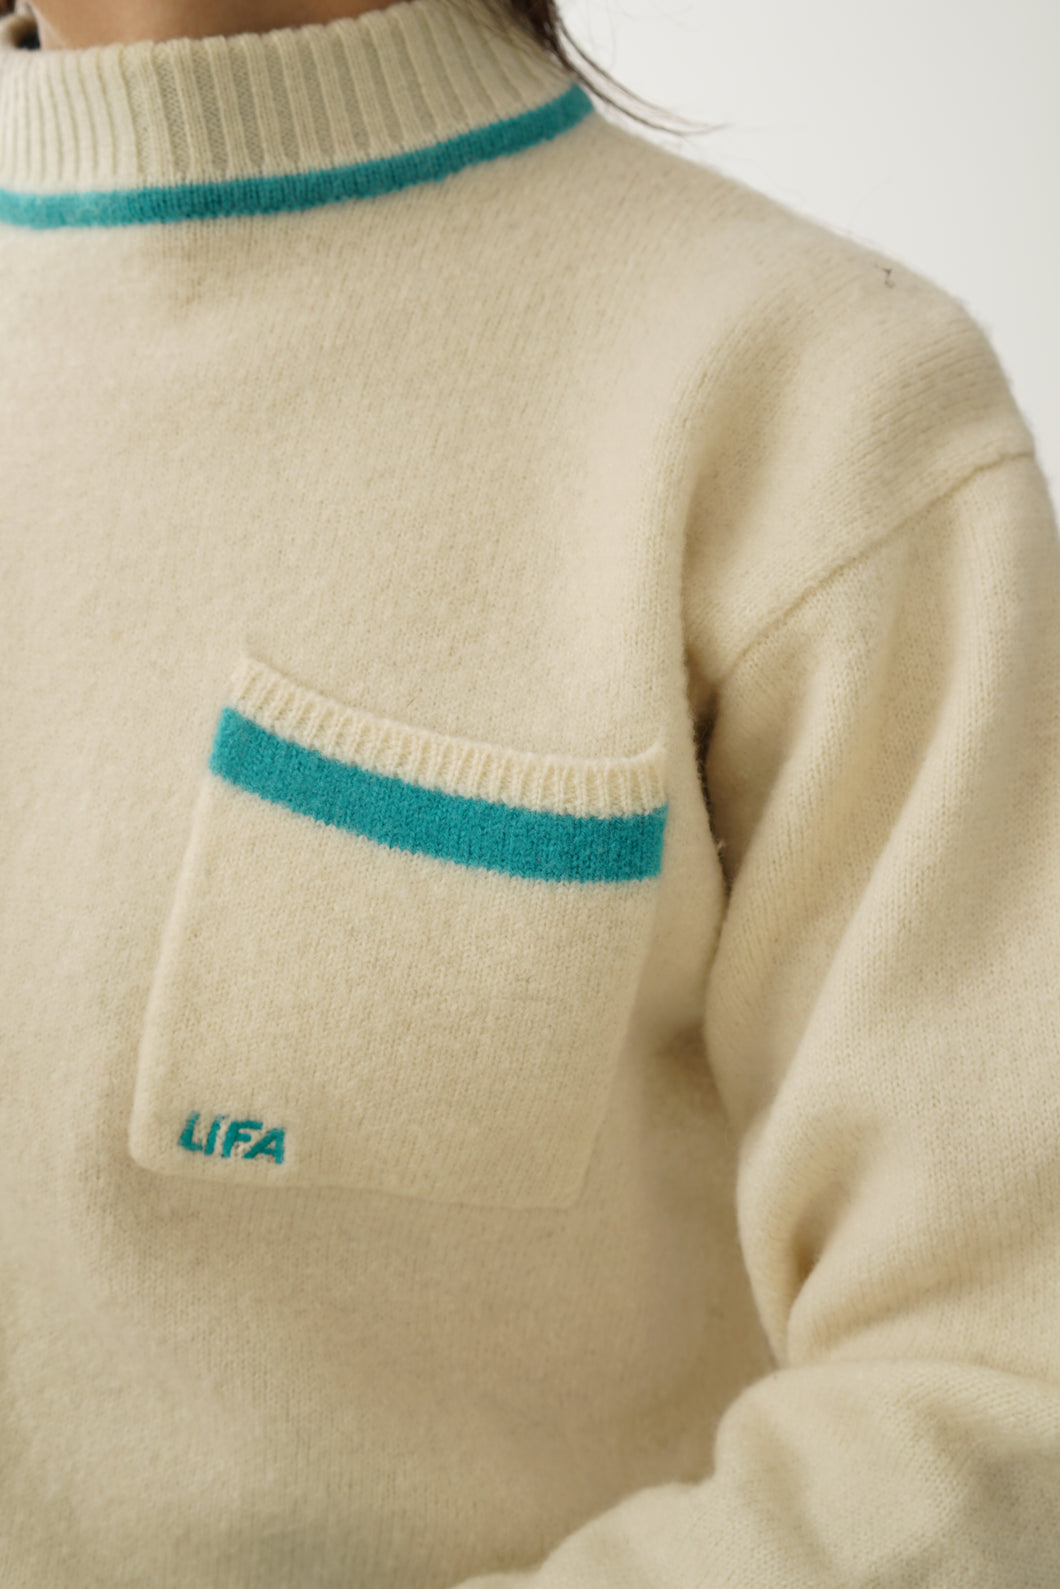 Insane LIFA pure wool vintage ski sweater in white and turquoise, like new size S